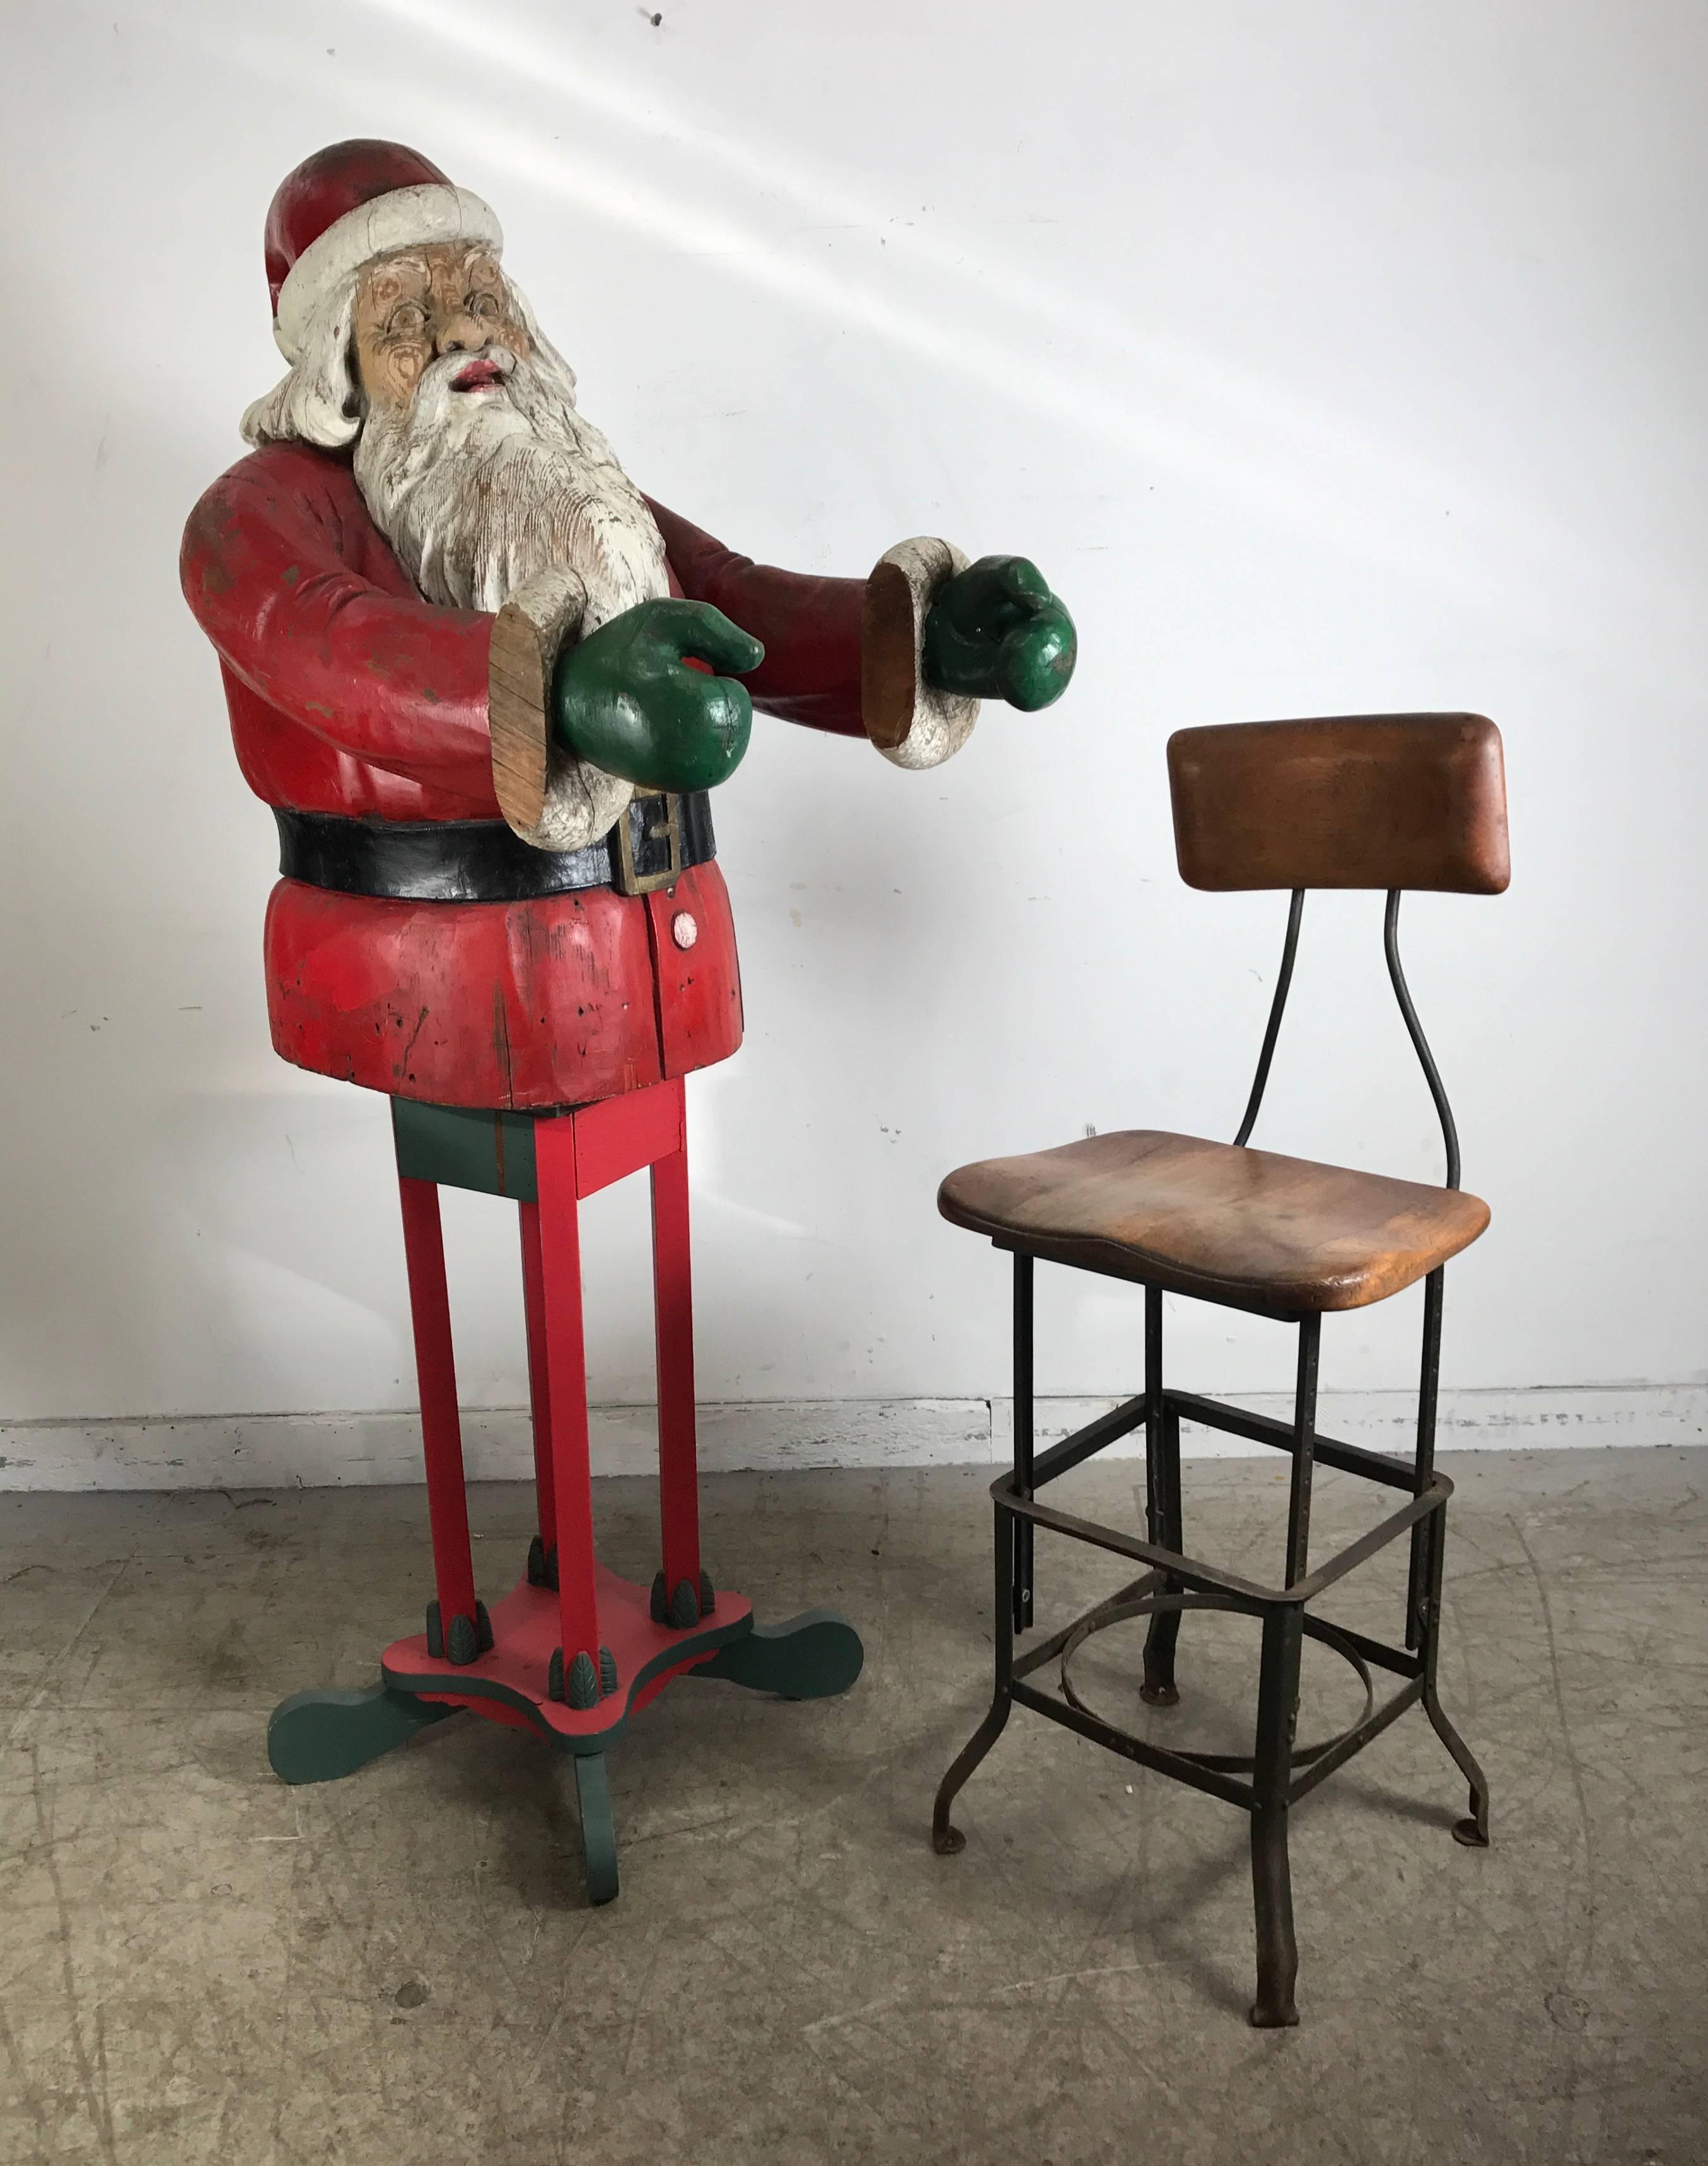 Turn of the Century Life Size Carved Wood and Painted Folk Art Santa Sculpture 4